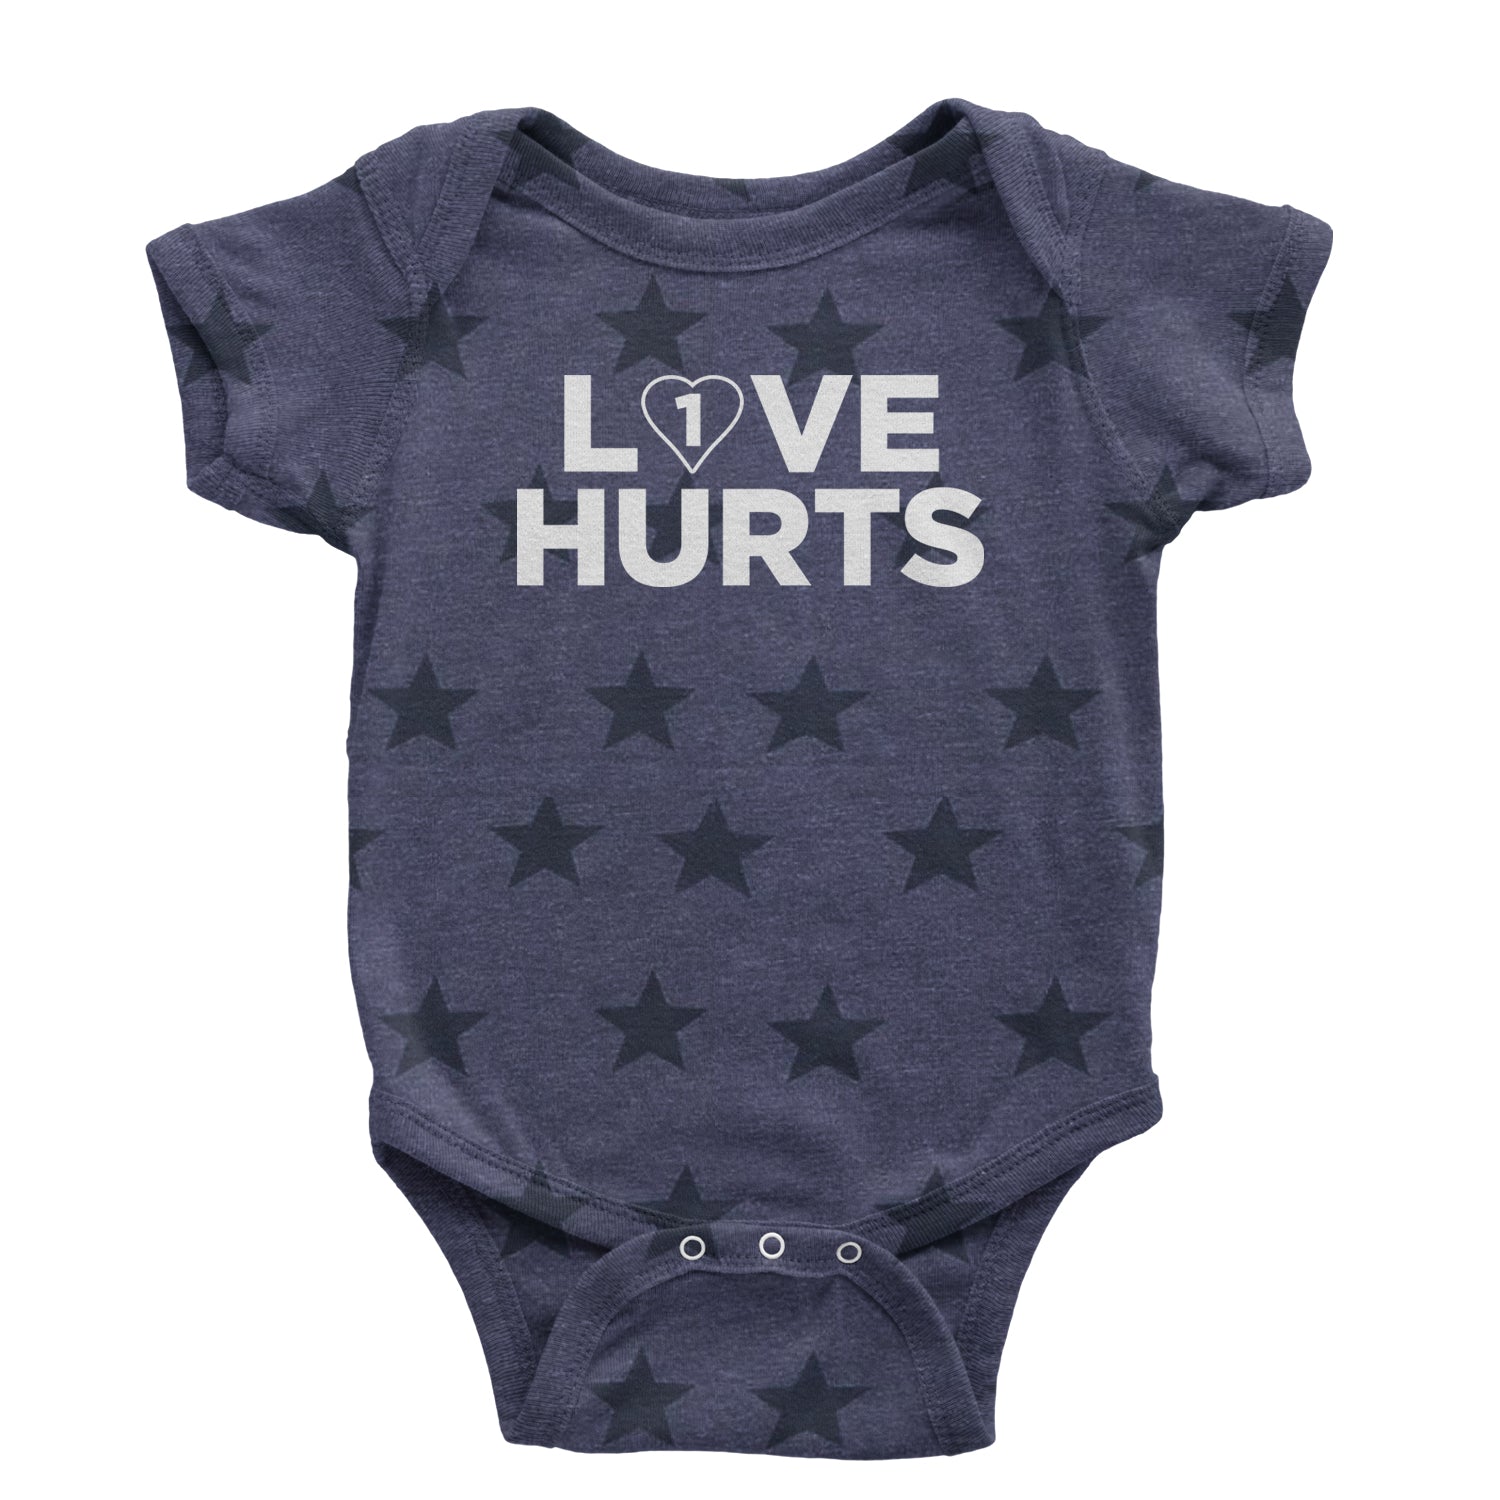 Love Hurts Philadelphia Infant One-Piece Romper Bodysuit and Toddler T-shirt birds, football, go, philly by Expression Tees